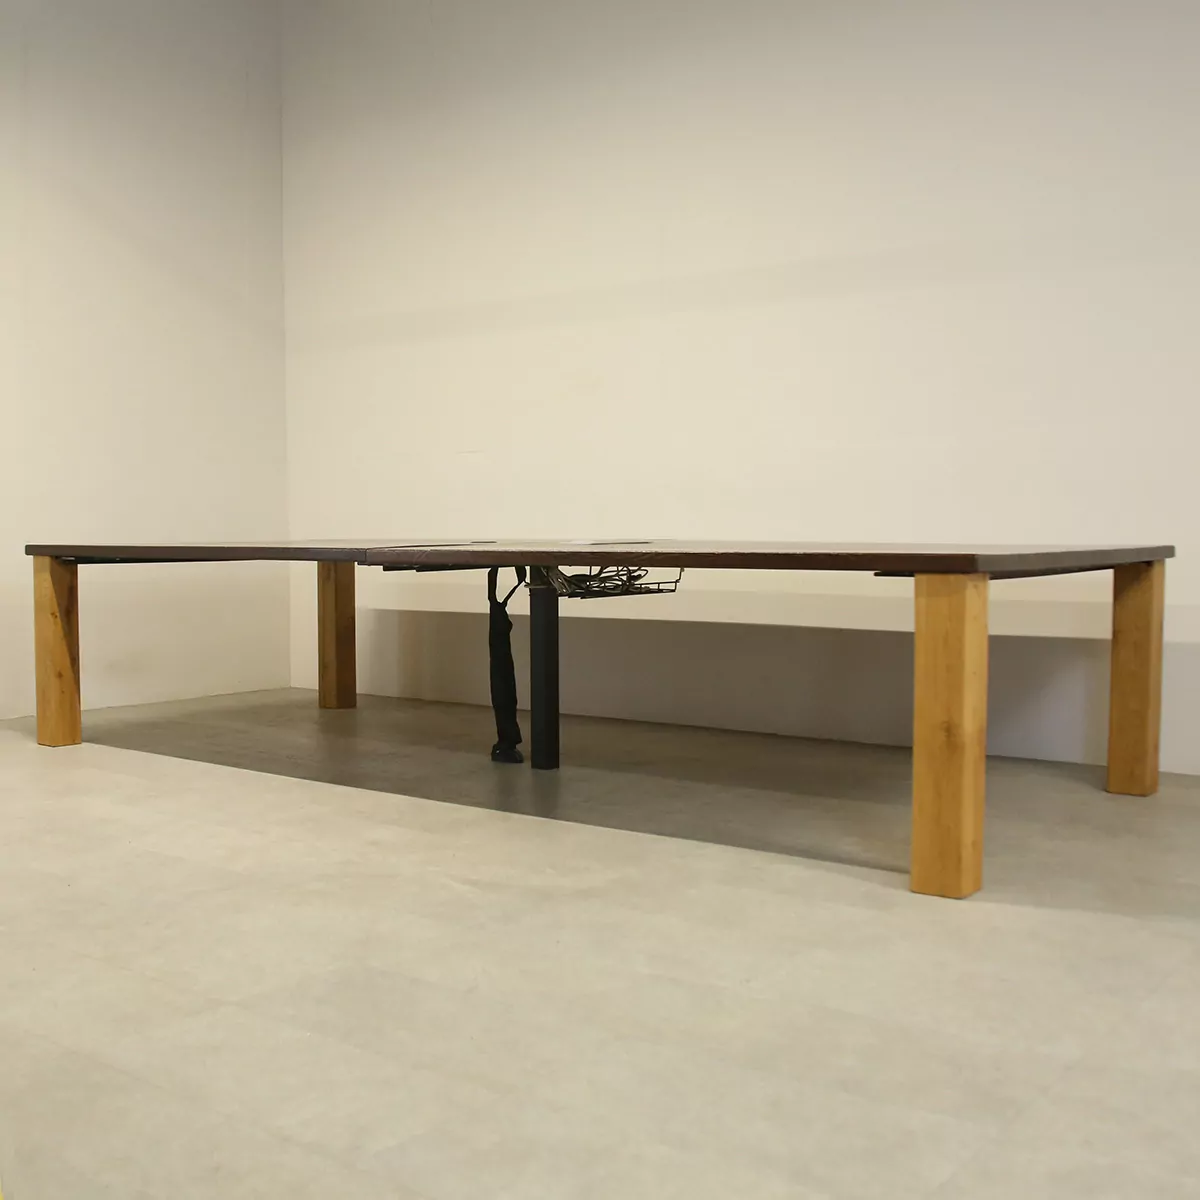 Stained Solid Oak 3610 x 1590 Meeting Table with Power/Data